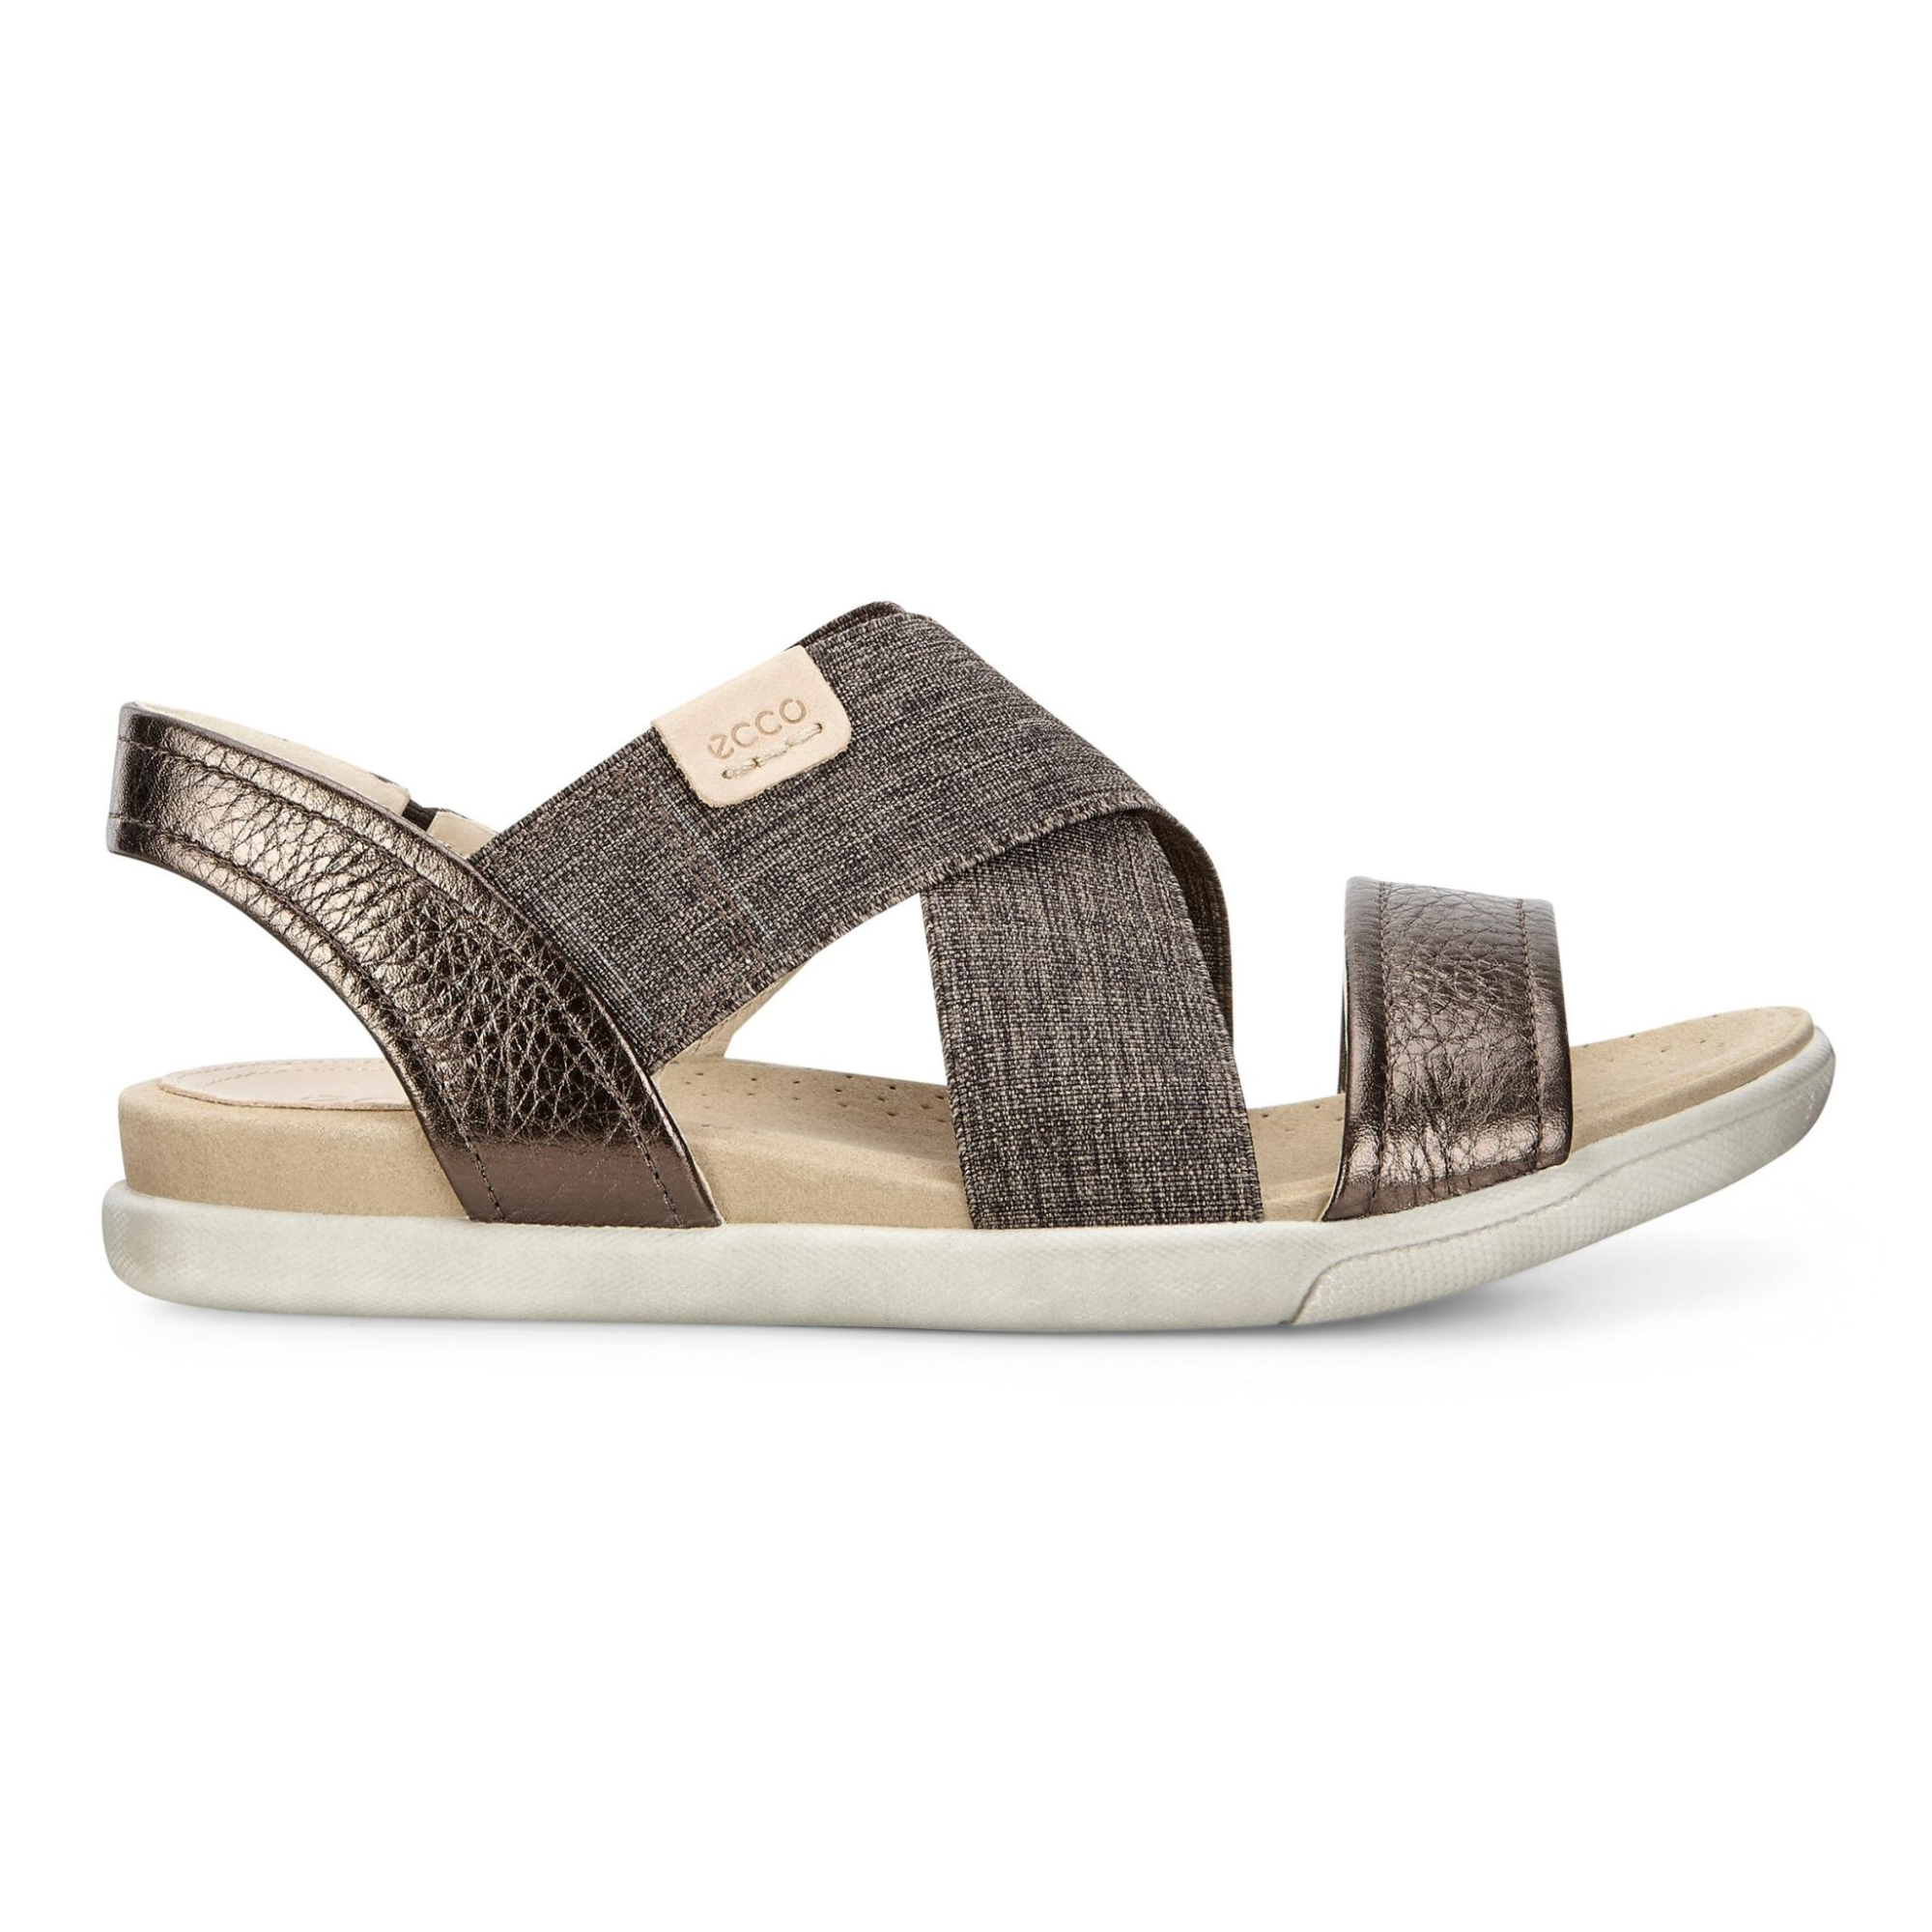 hjem svinge Pastor Ecco Damara 2 Strap Sandal 42 - Products - Veryk Mall - Veryk Mall, many  product, quick response, safe your money!